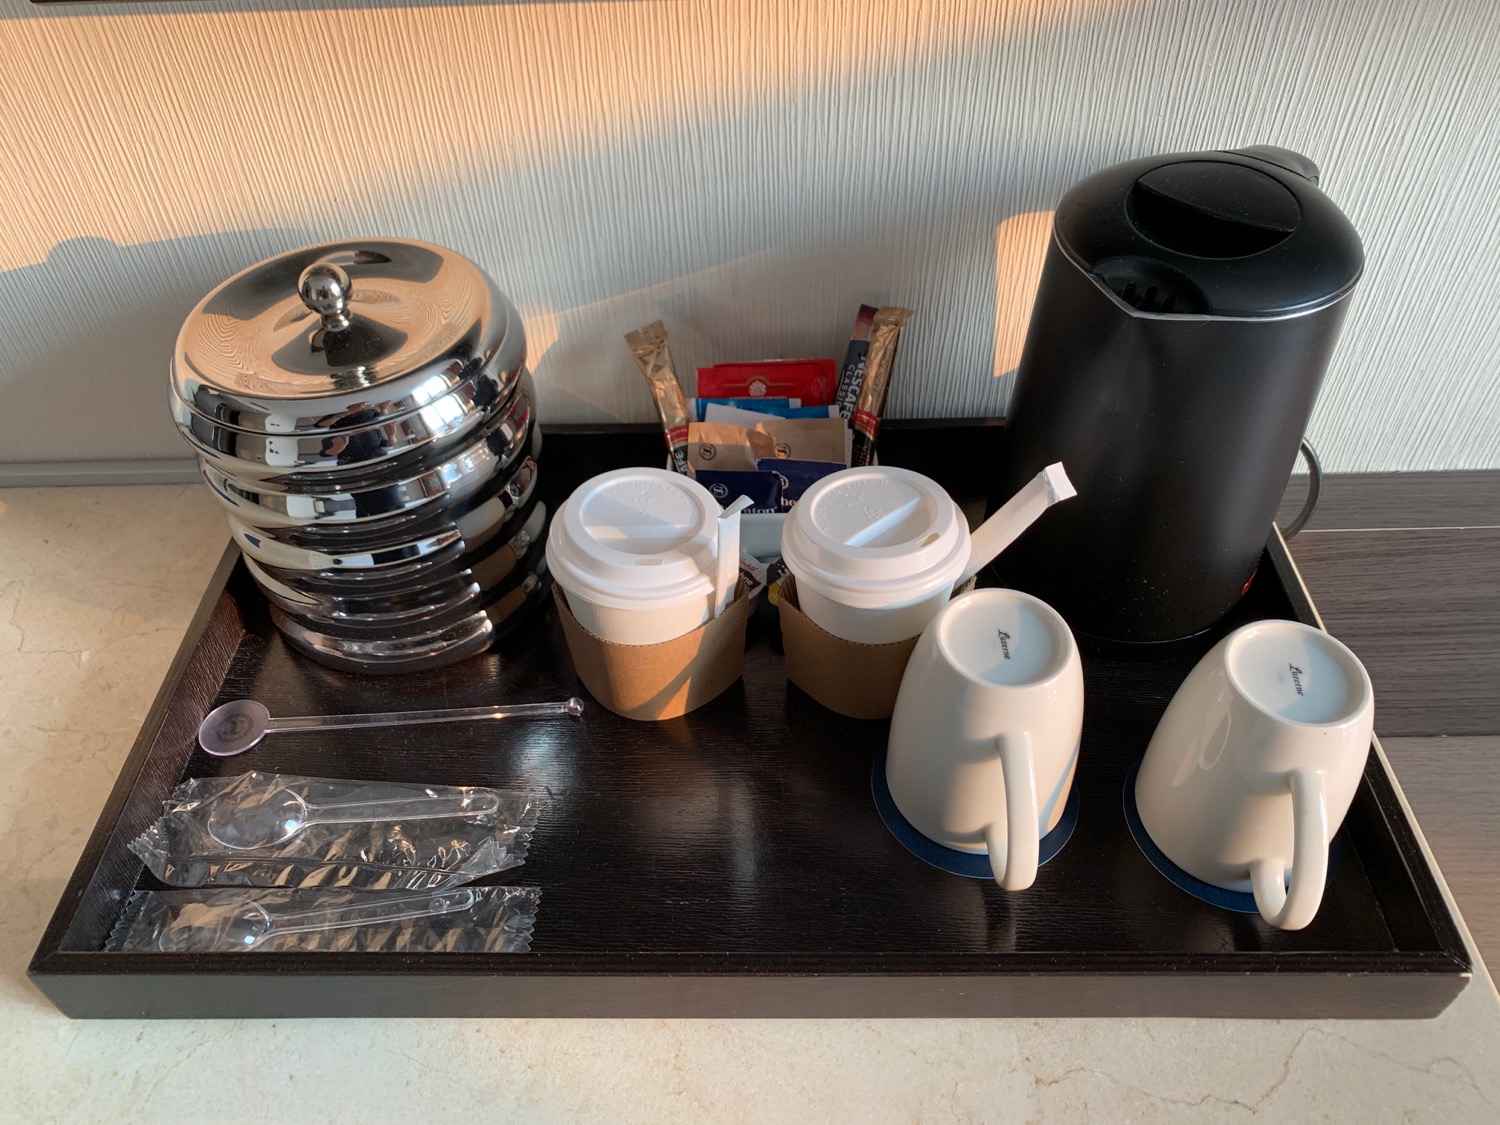 a tray with coffee cups and other items on it